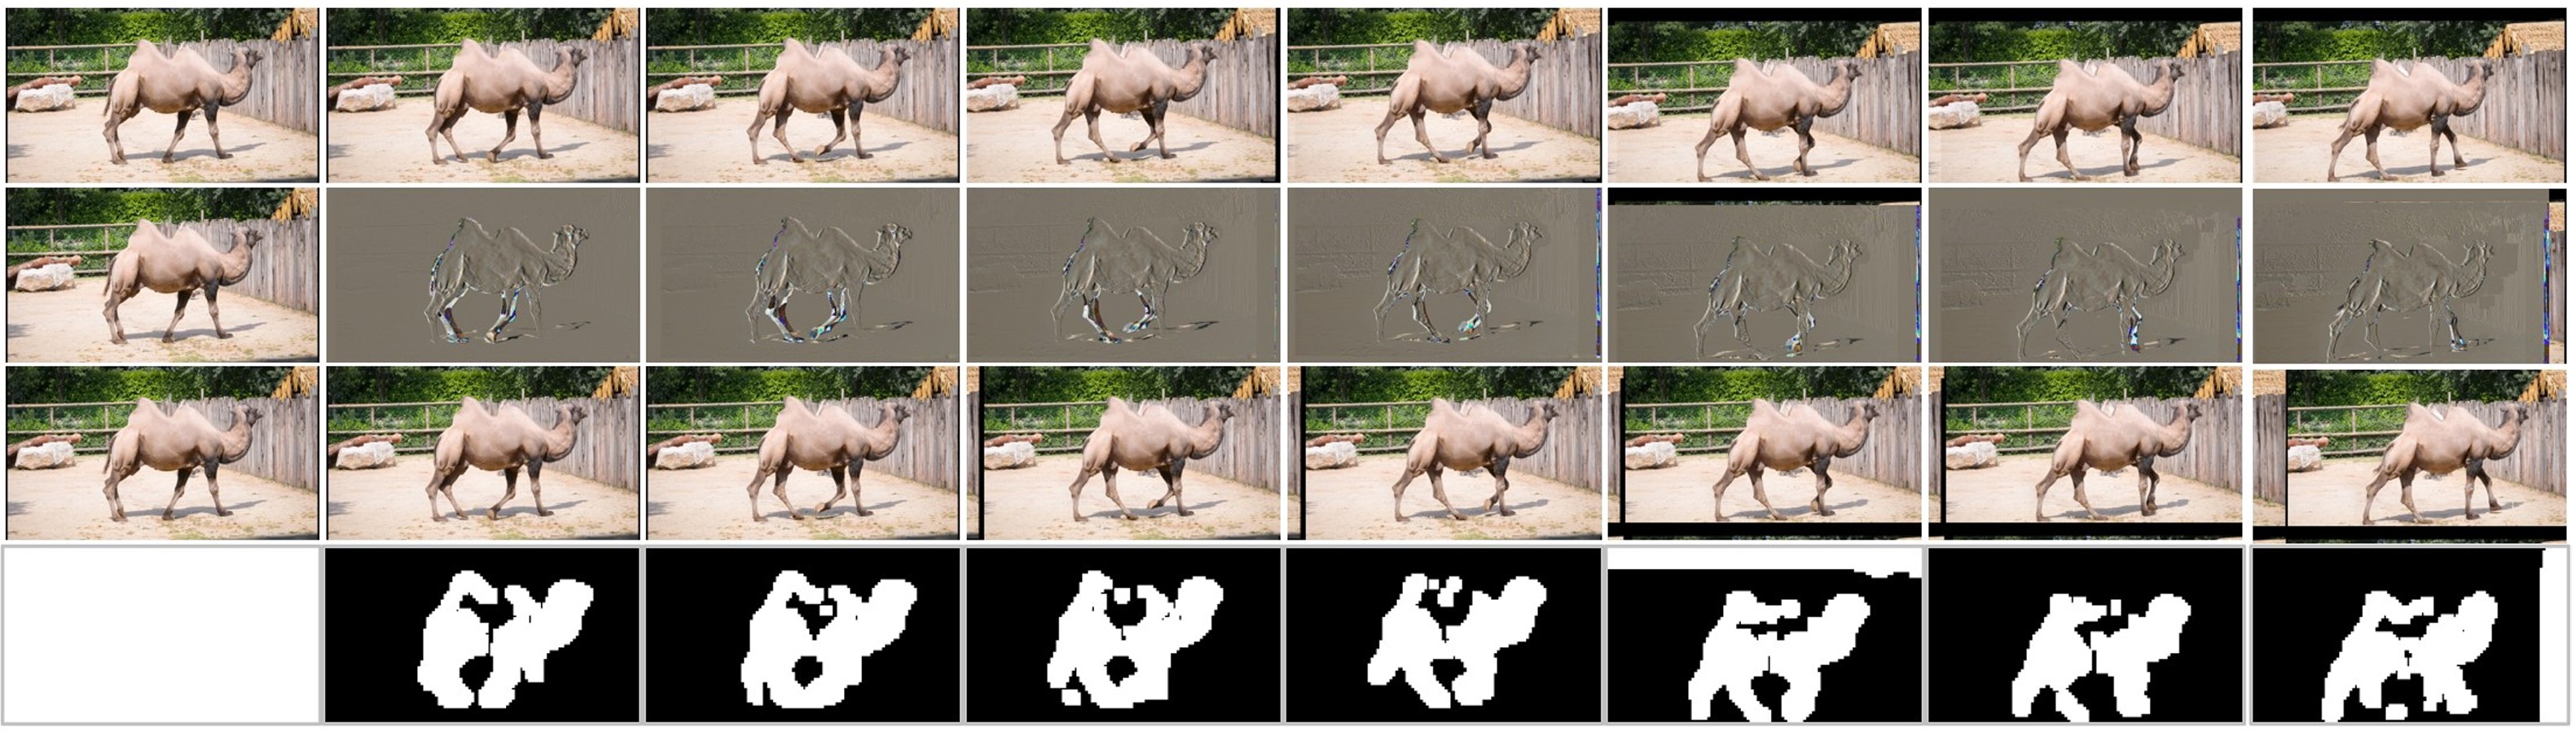 MotionDeltaCNN: Sparse CNN Inference of Frame Differences in Moving Camera Videos with Spherical Buffers and Padded Convolutions teaser